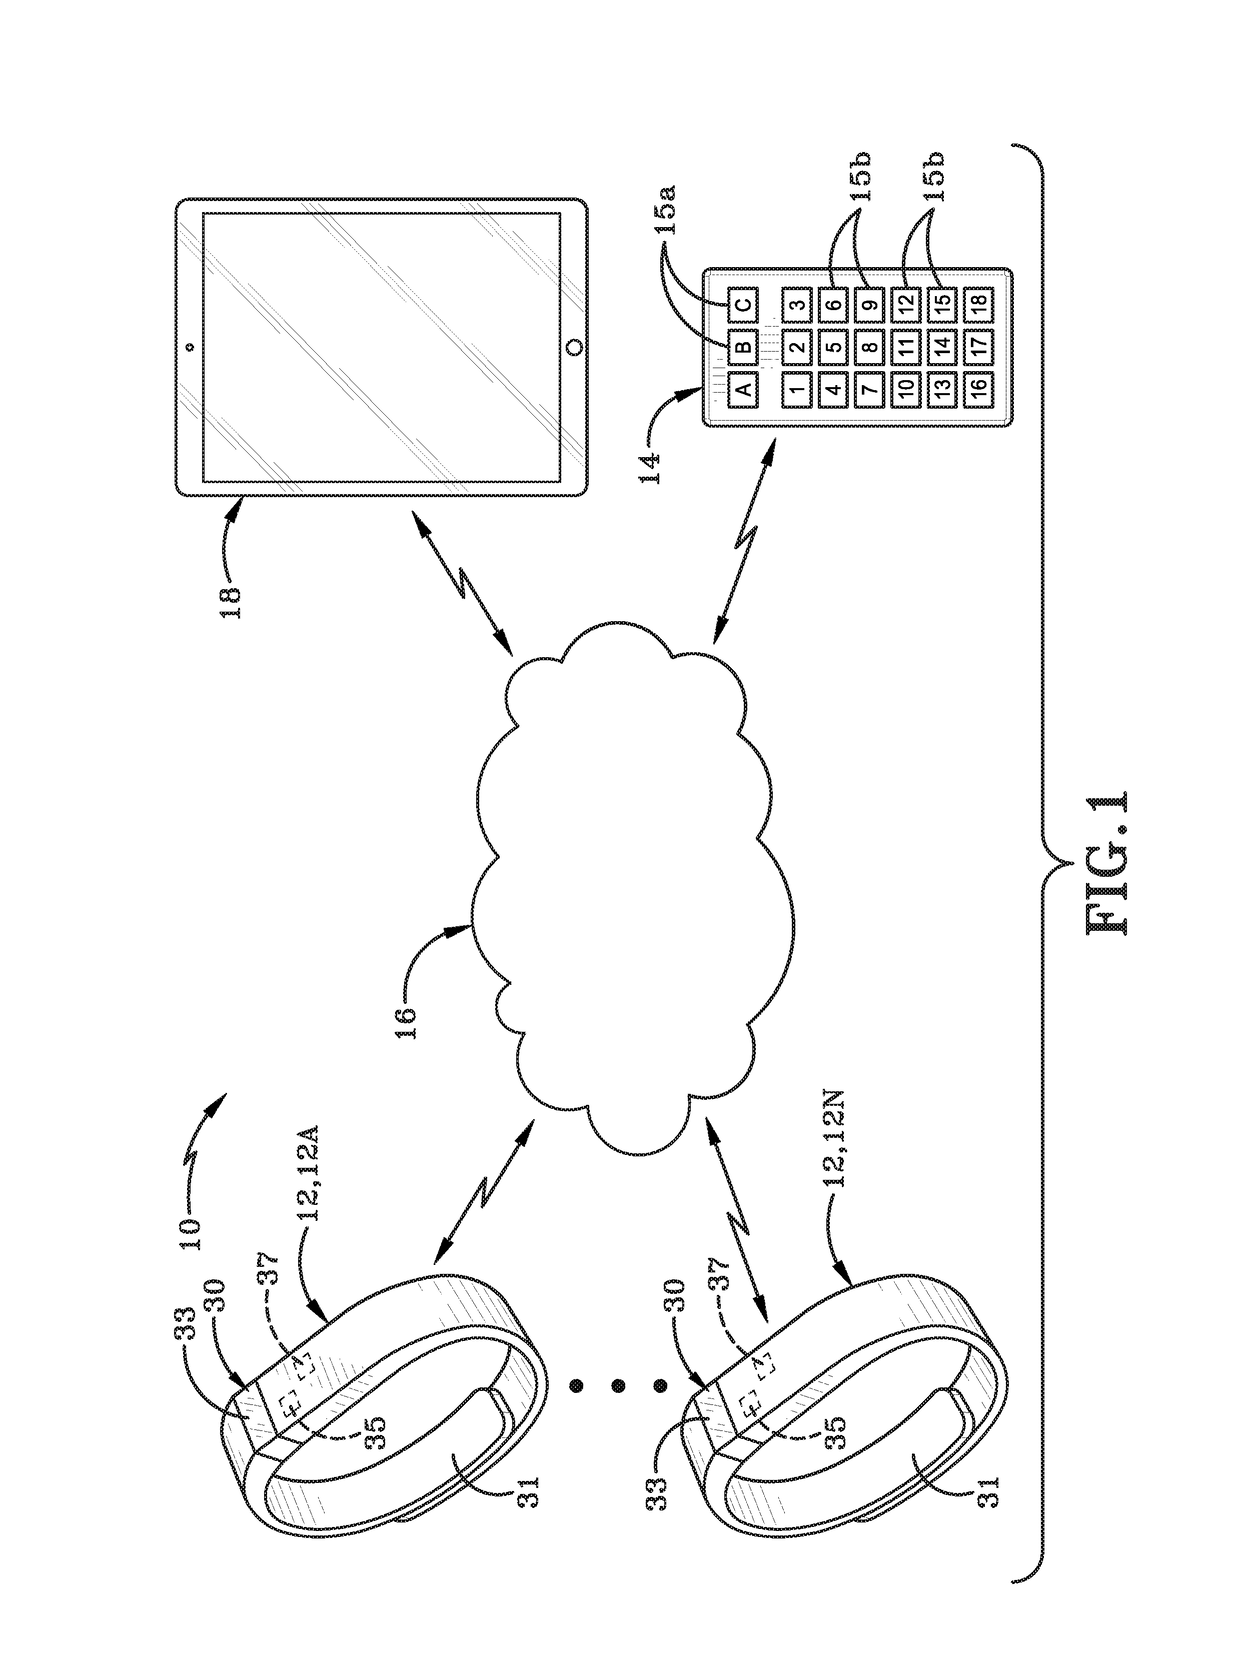 Student engagement system, device, and method